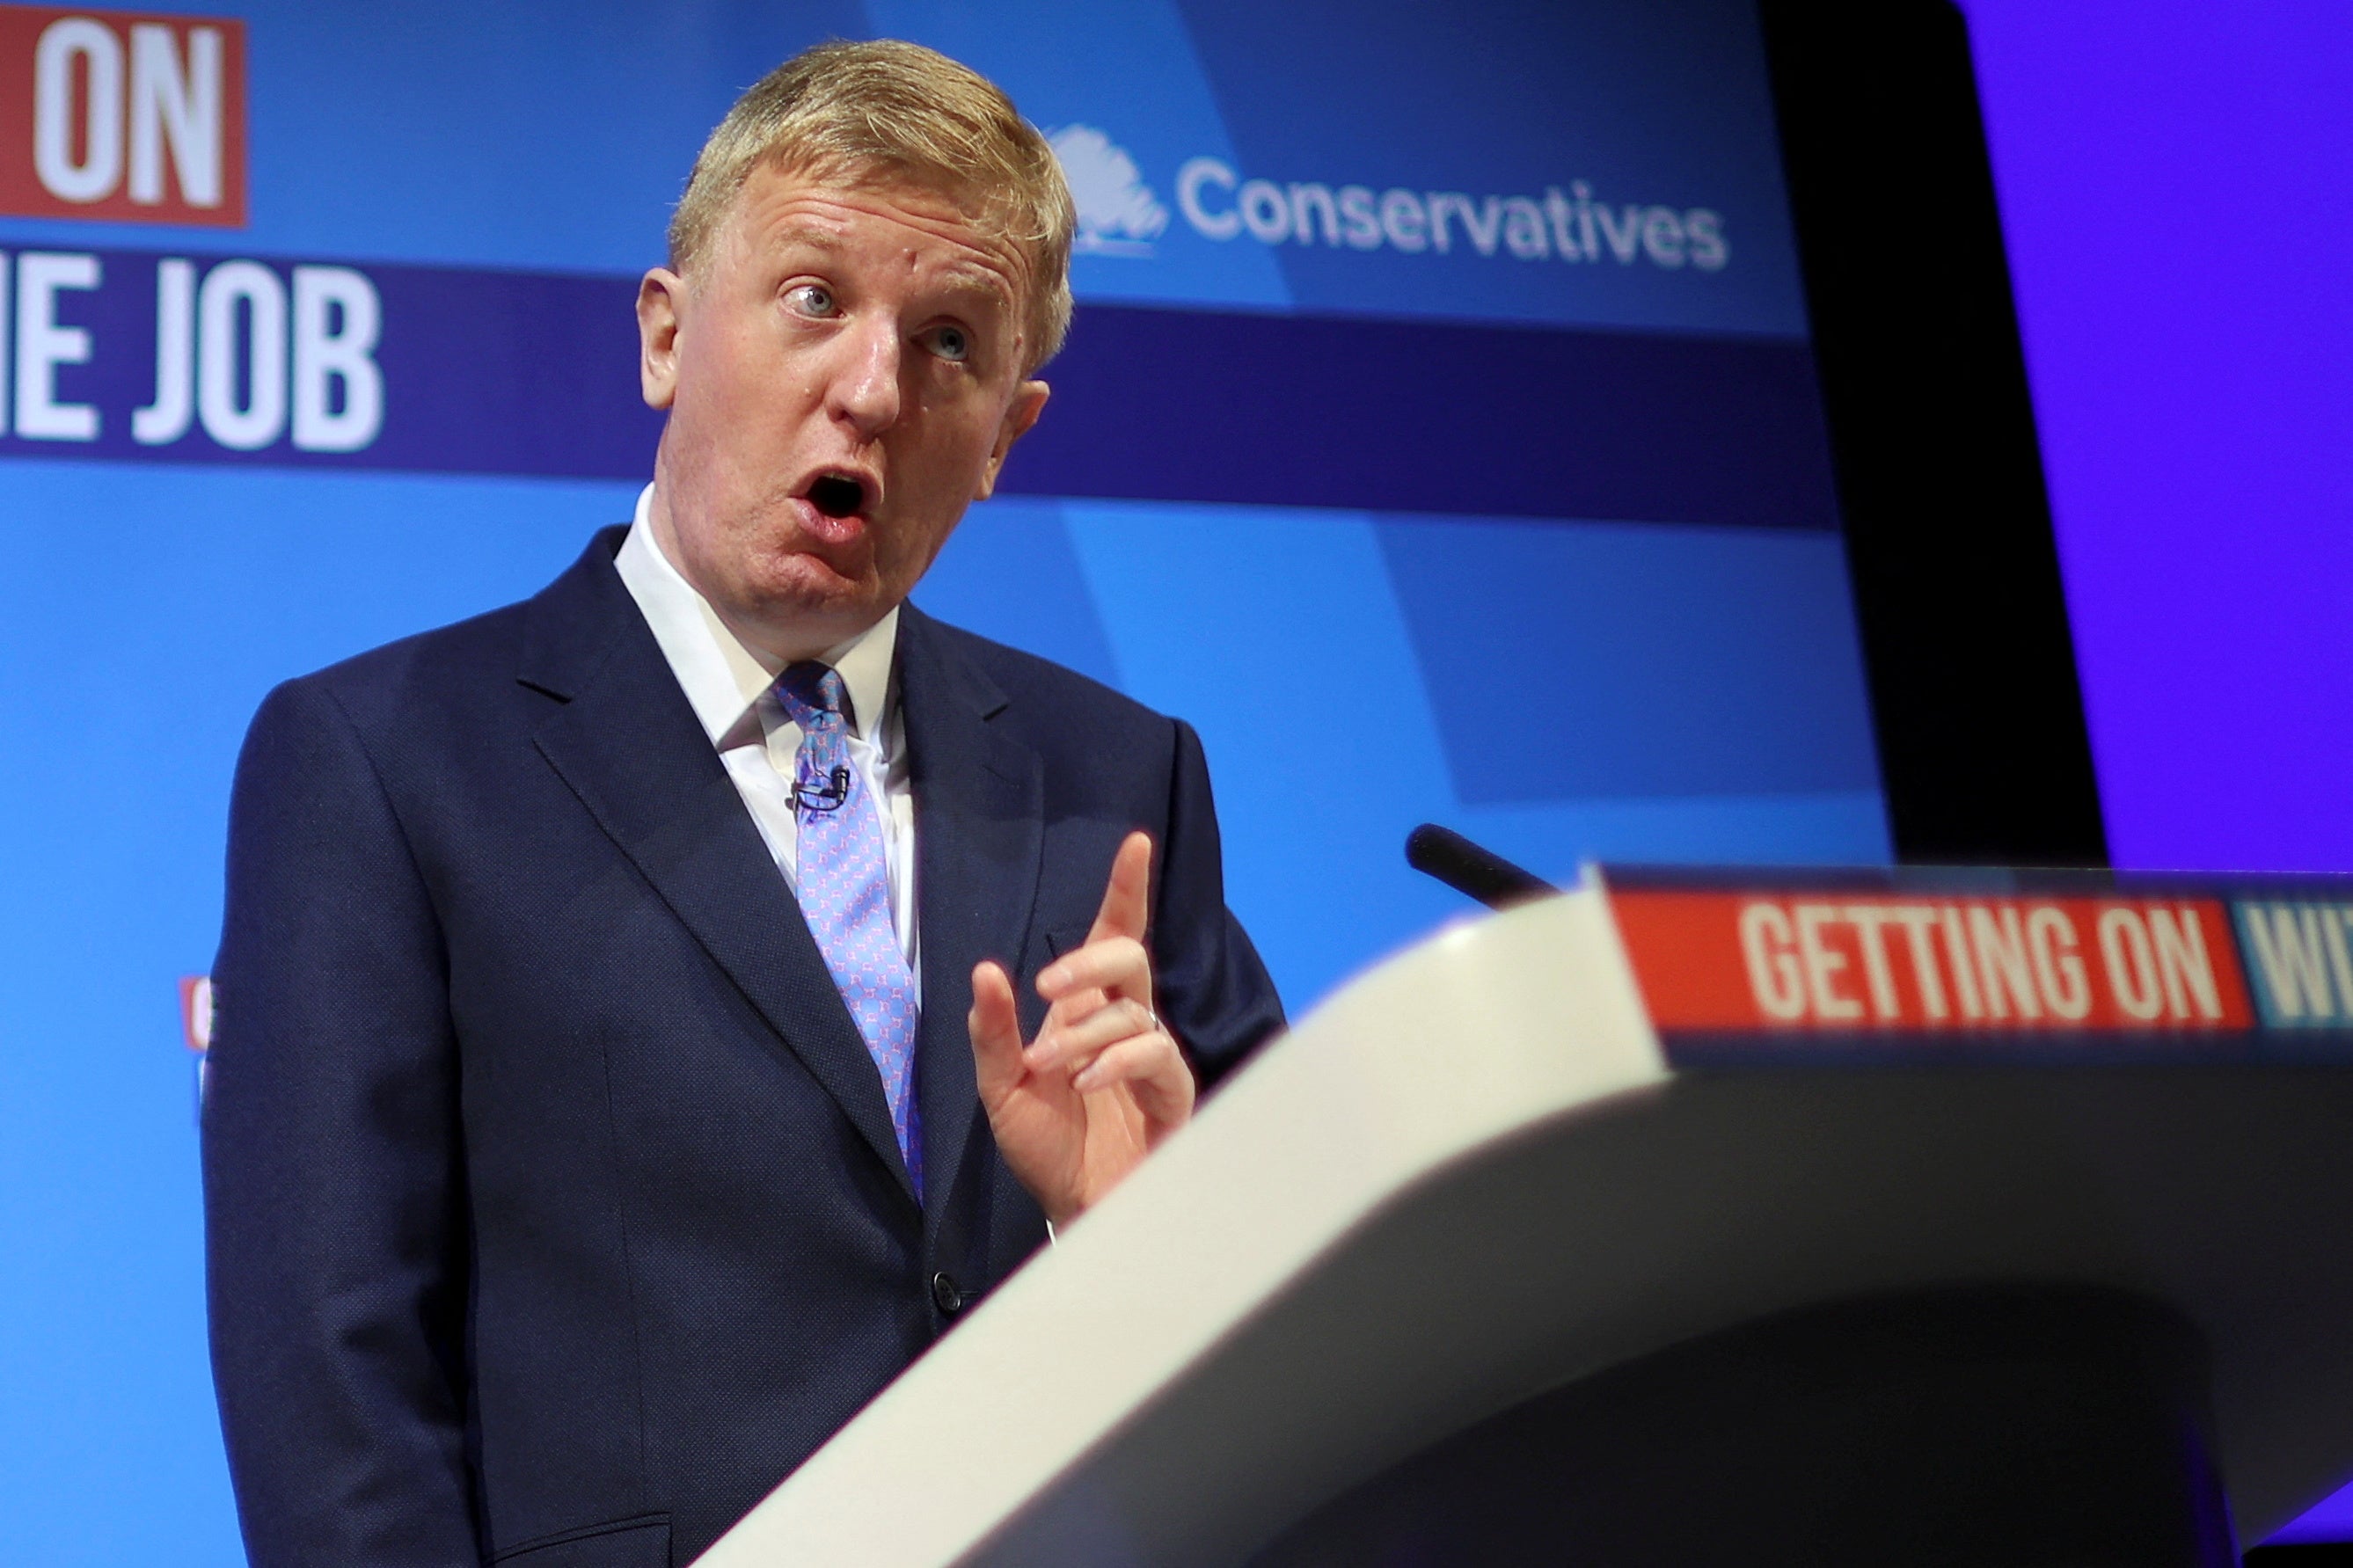 Oliver Dowden speaks at the Conservative Party spring conference in Blackpool on Friday